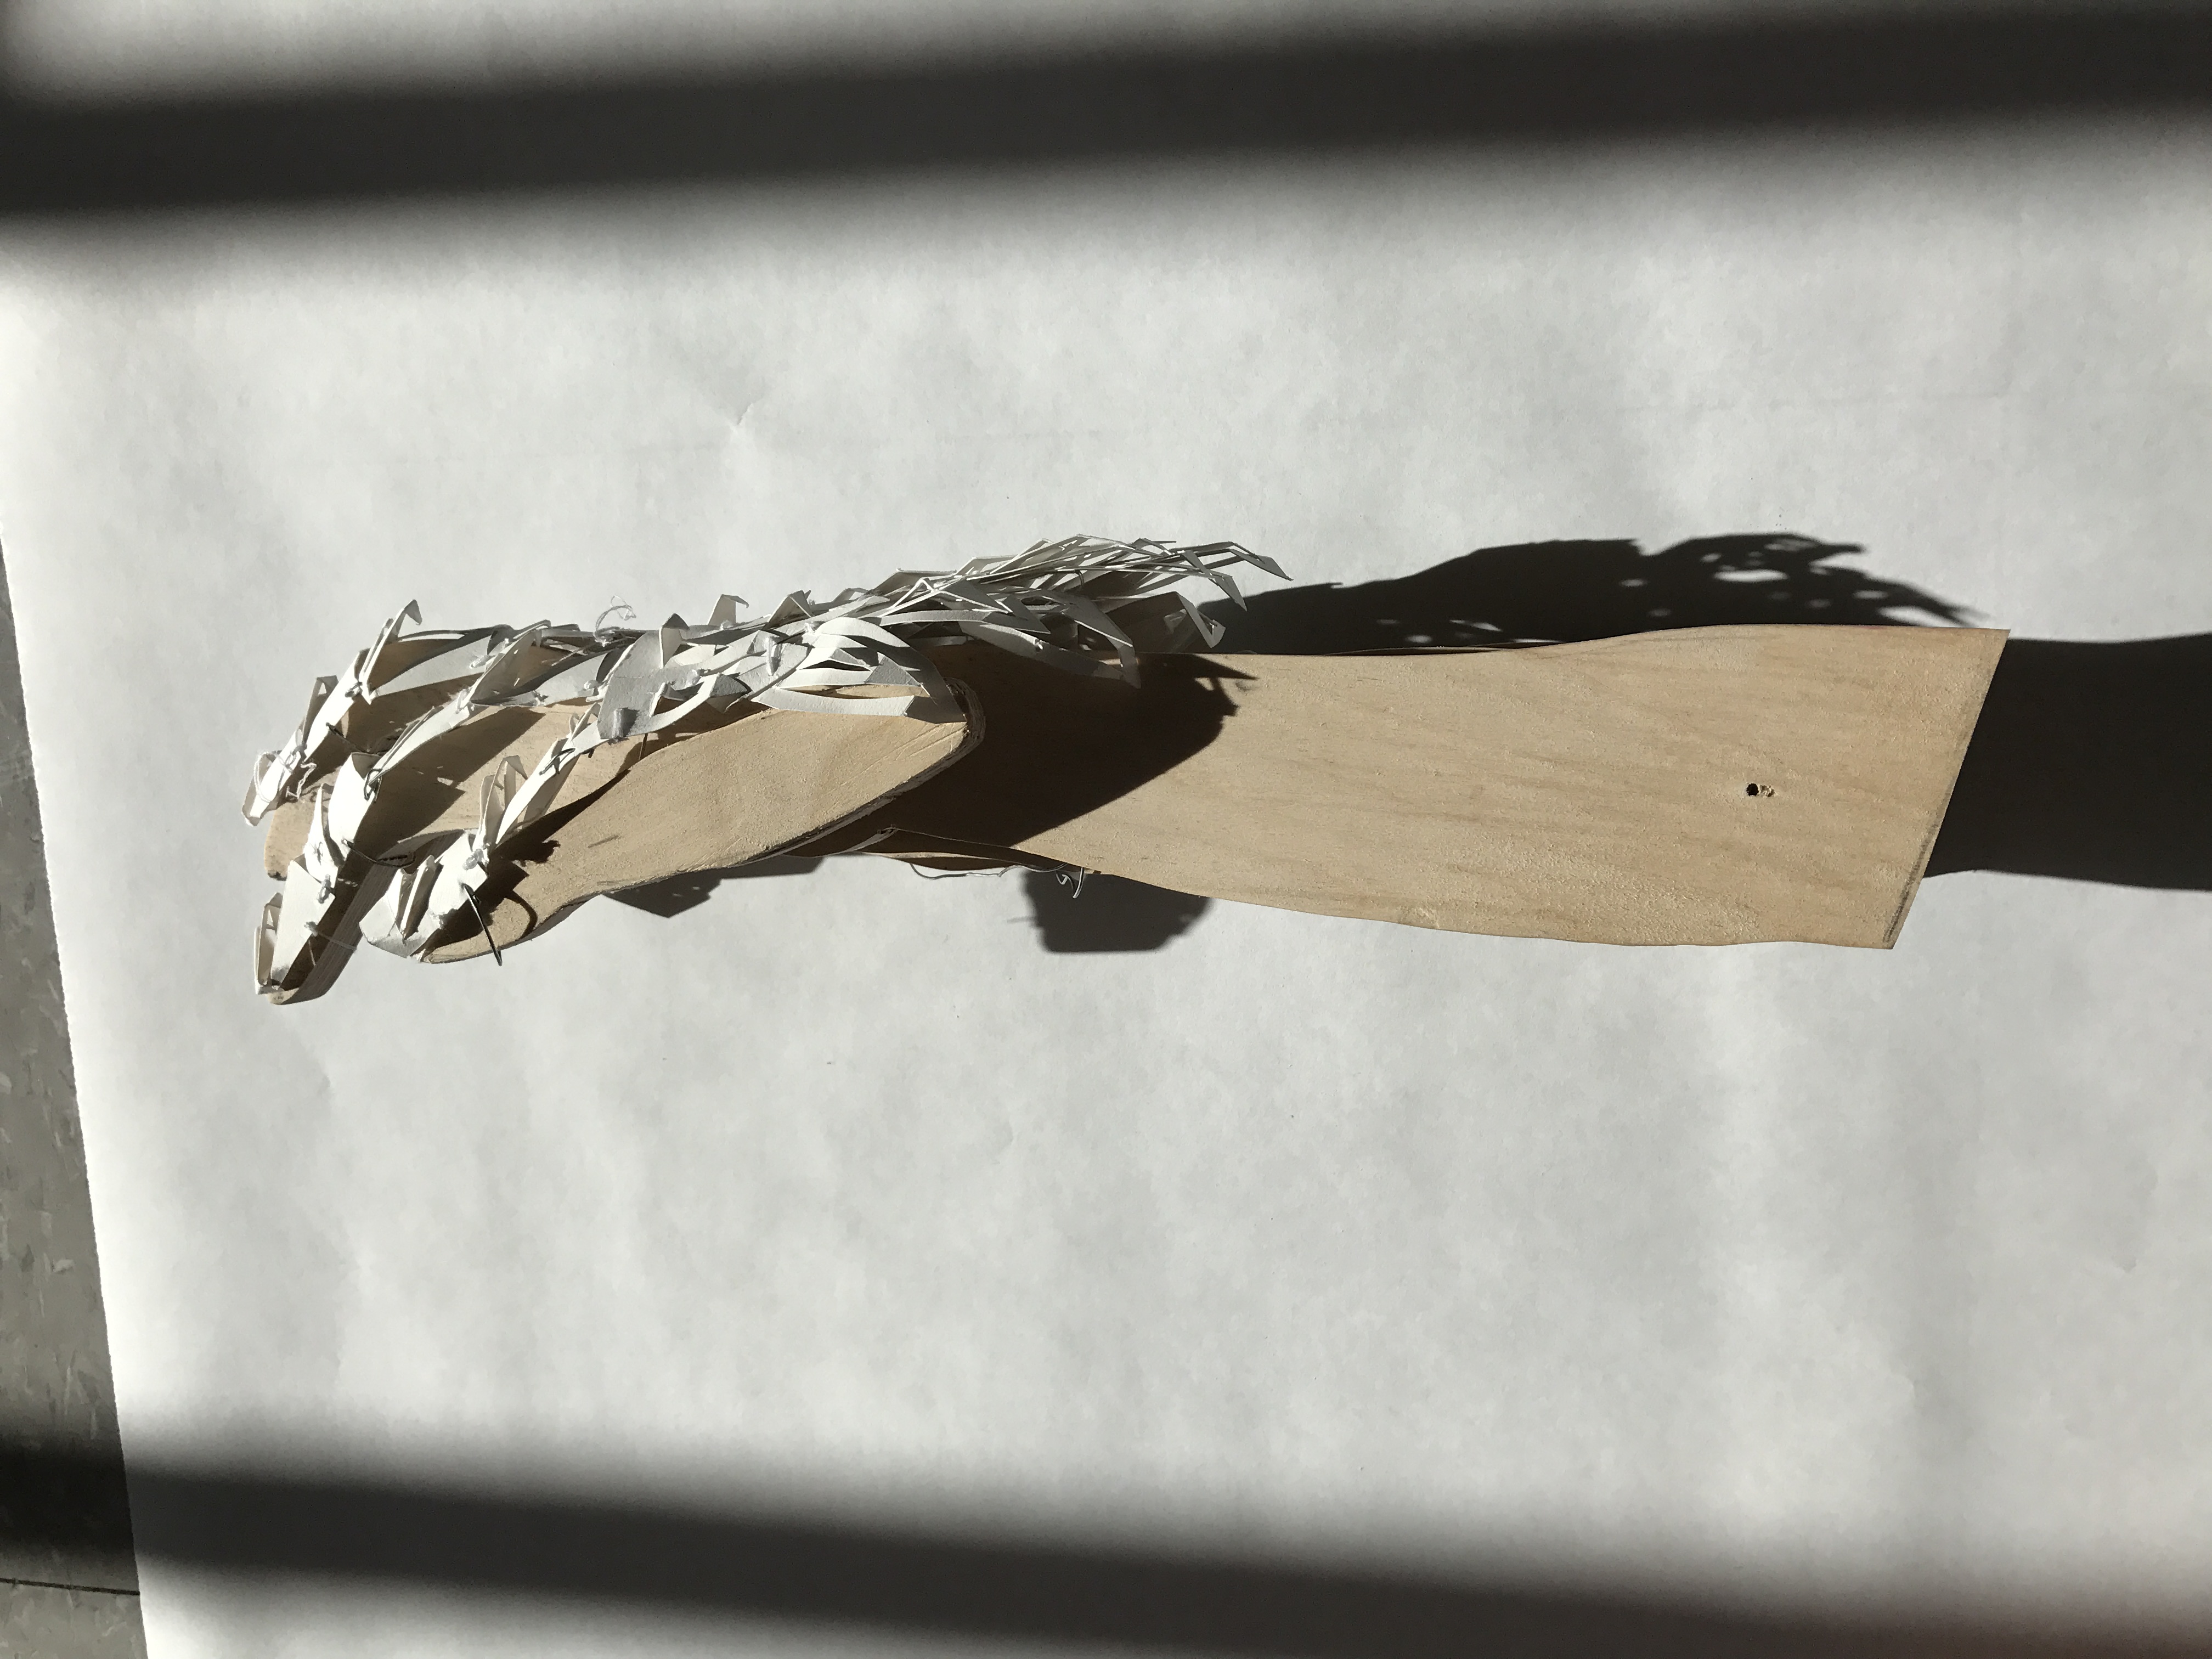 Space and Materiality: Process and Final Wooden Hand